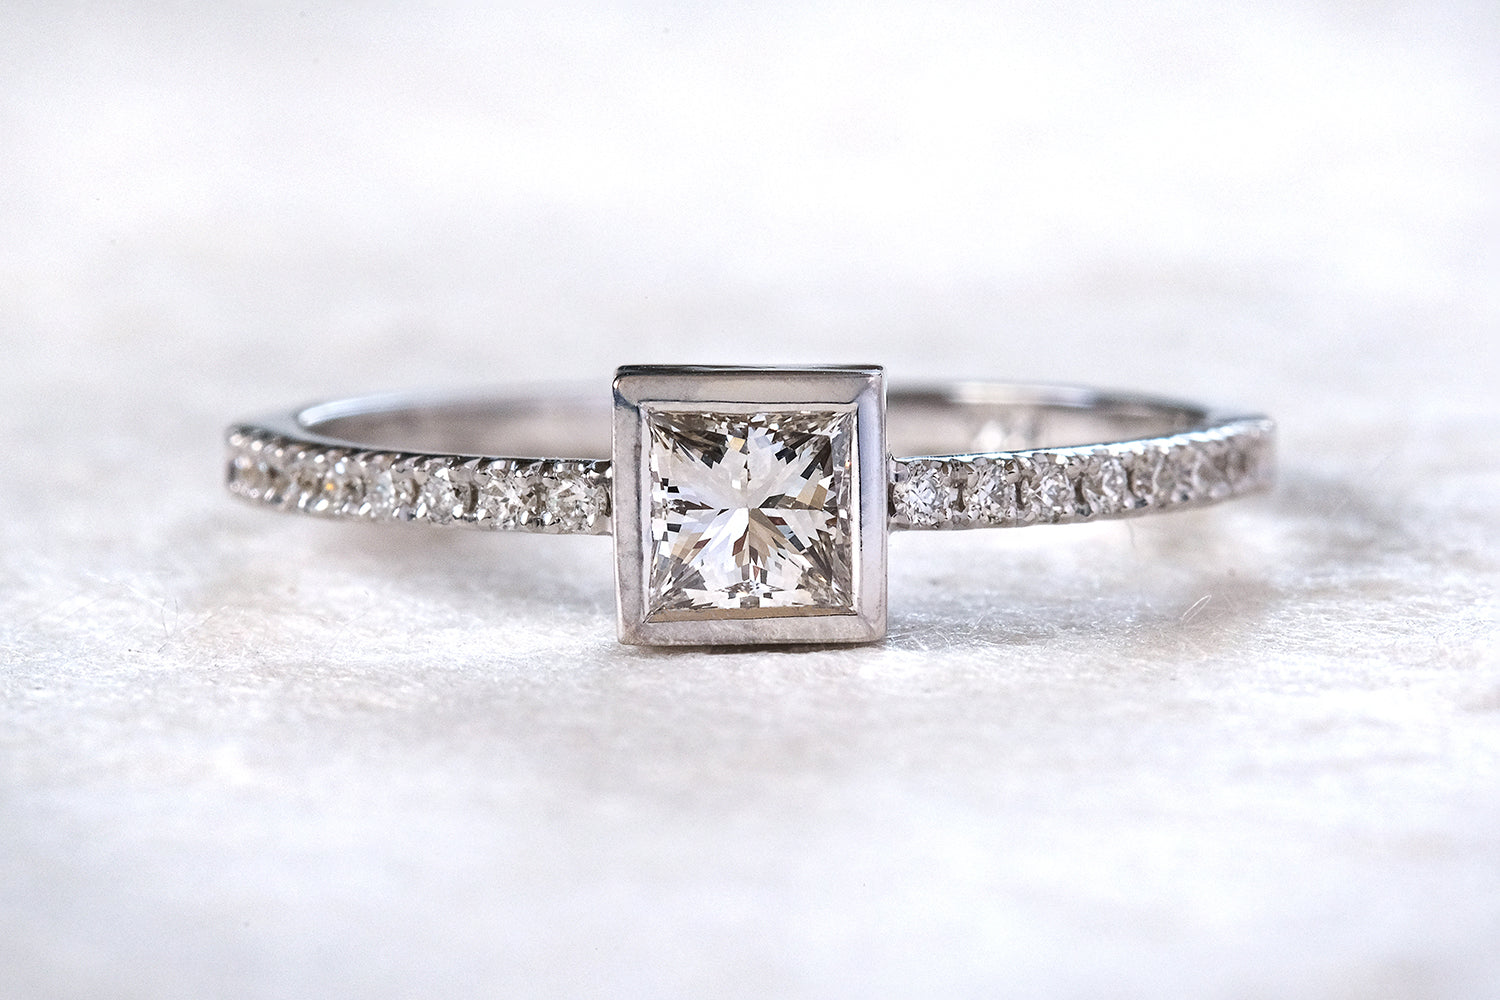 Engagement Ring With A Princess Cut Diamond And Diamonds On the Sides